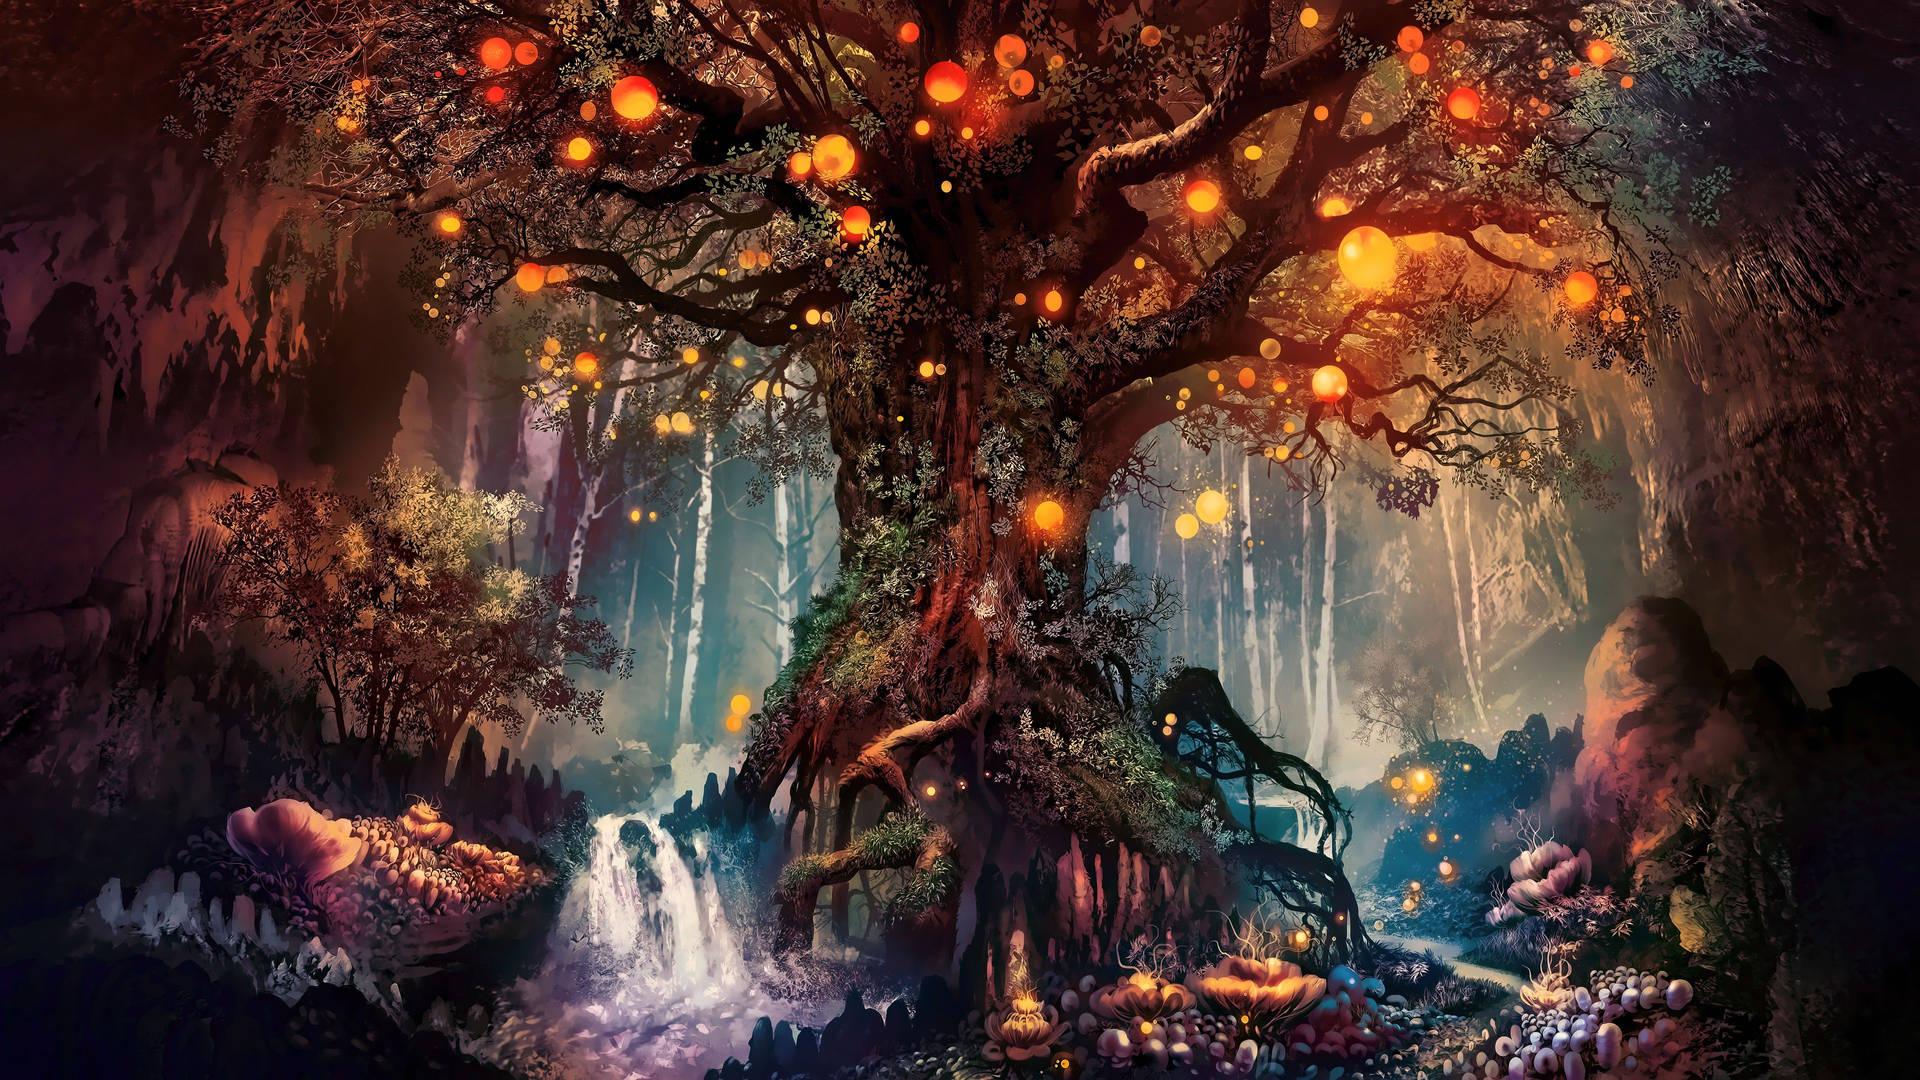 Free Fantasy Wallpaper Downloads, [500+] Fantasy Wallpapers for FREE |  